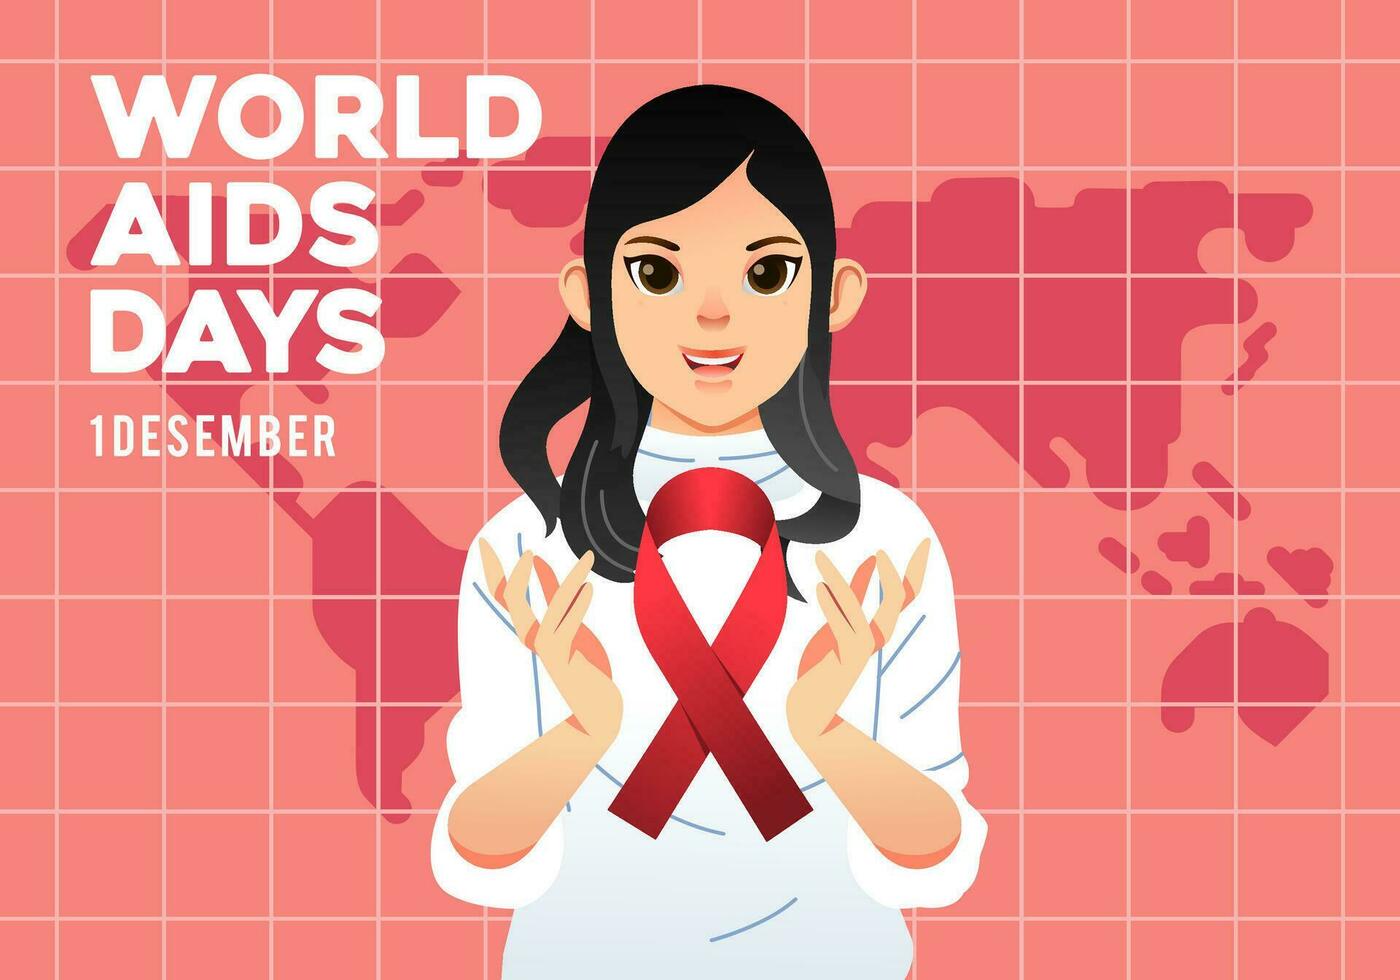 world AIDS day campaign poster, young women with AIDS logo on her hand and world map at background vector illustration